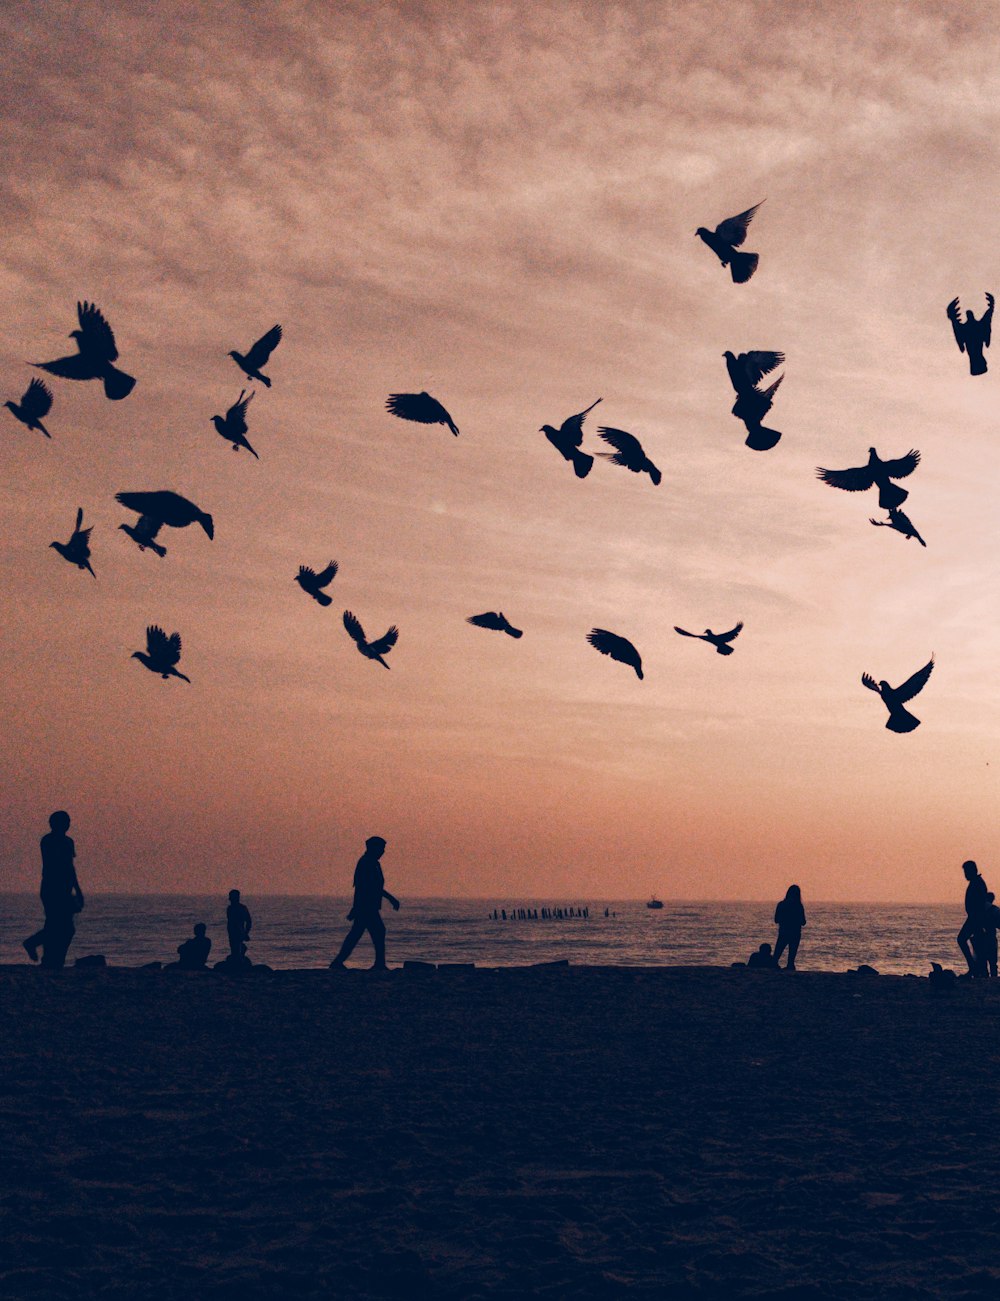 silhouette of flock of birds flying on seashore with people walking and standing during sunset